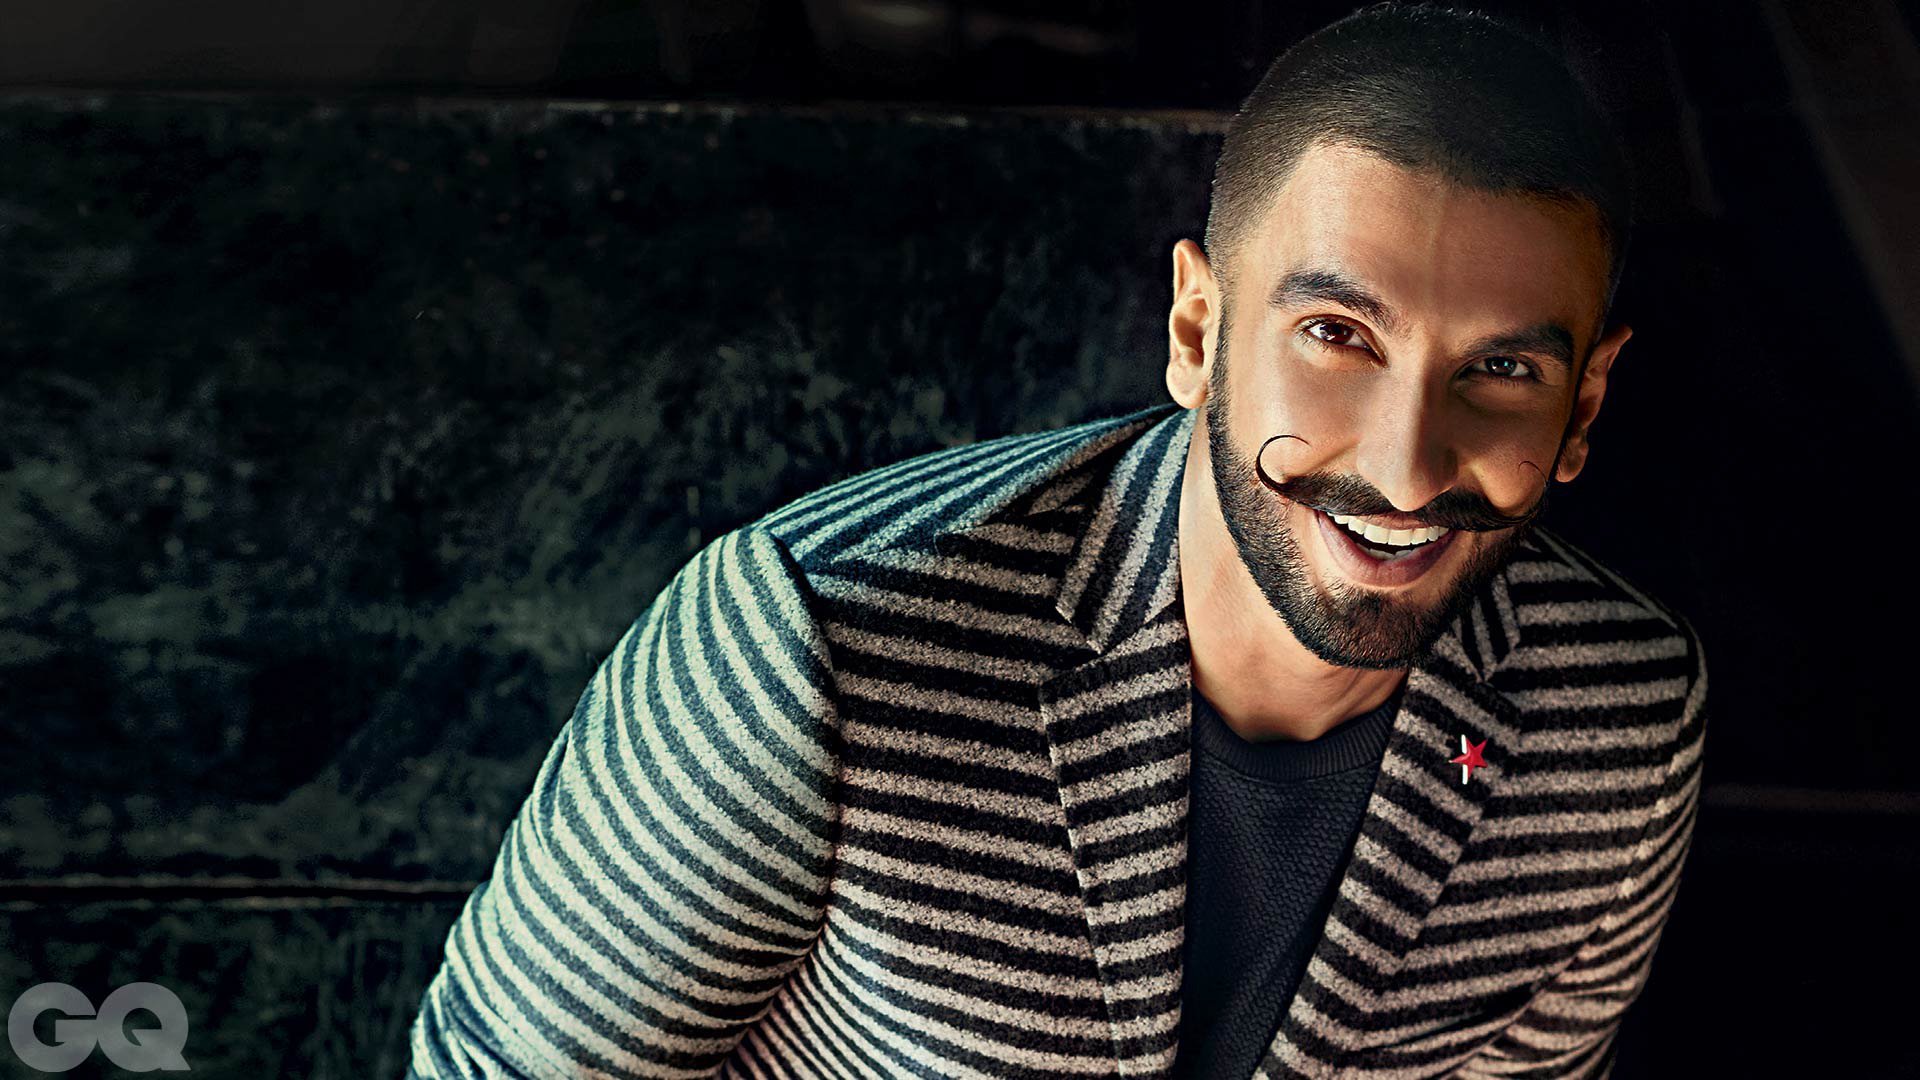 Ranveer Singh Gets Candid About Having Sex At 12 Deepika And Much More In This Revealing Interview